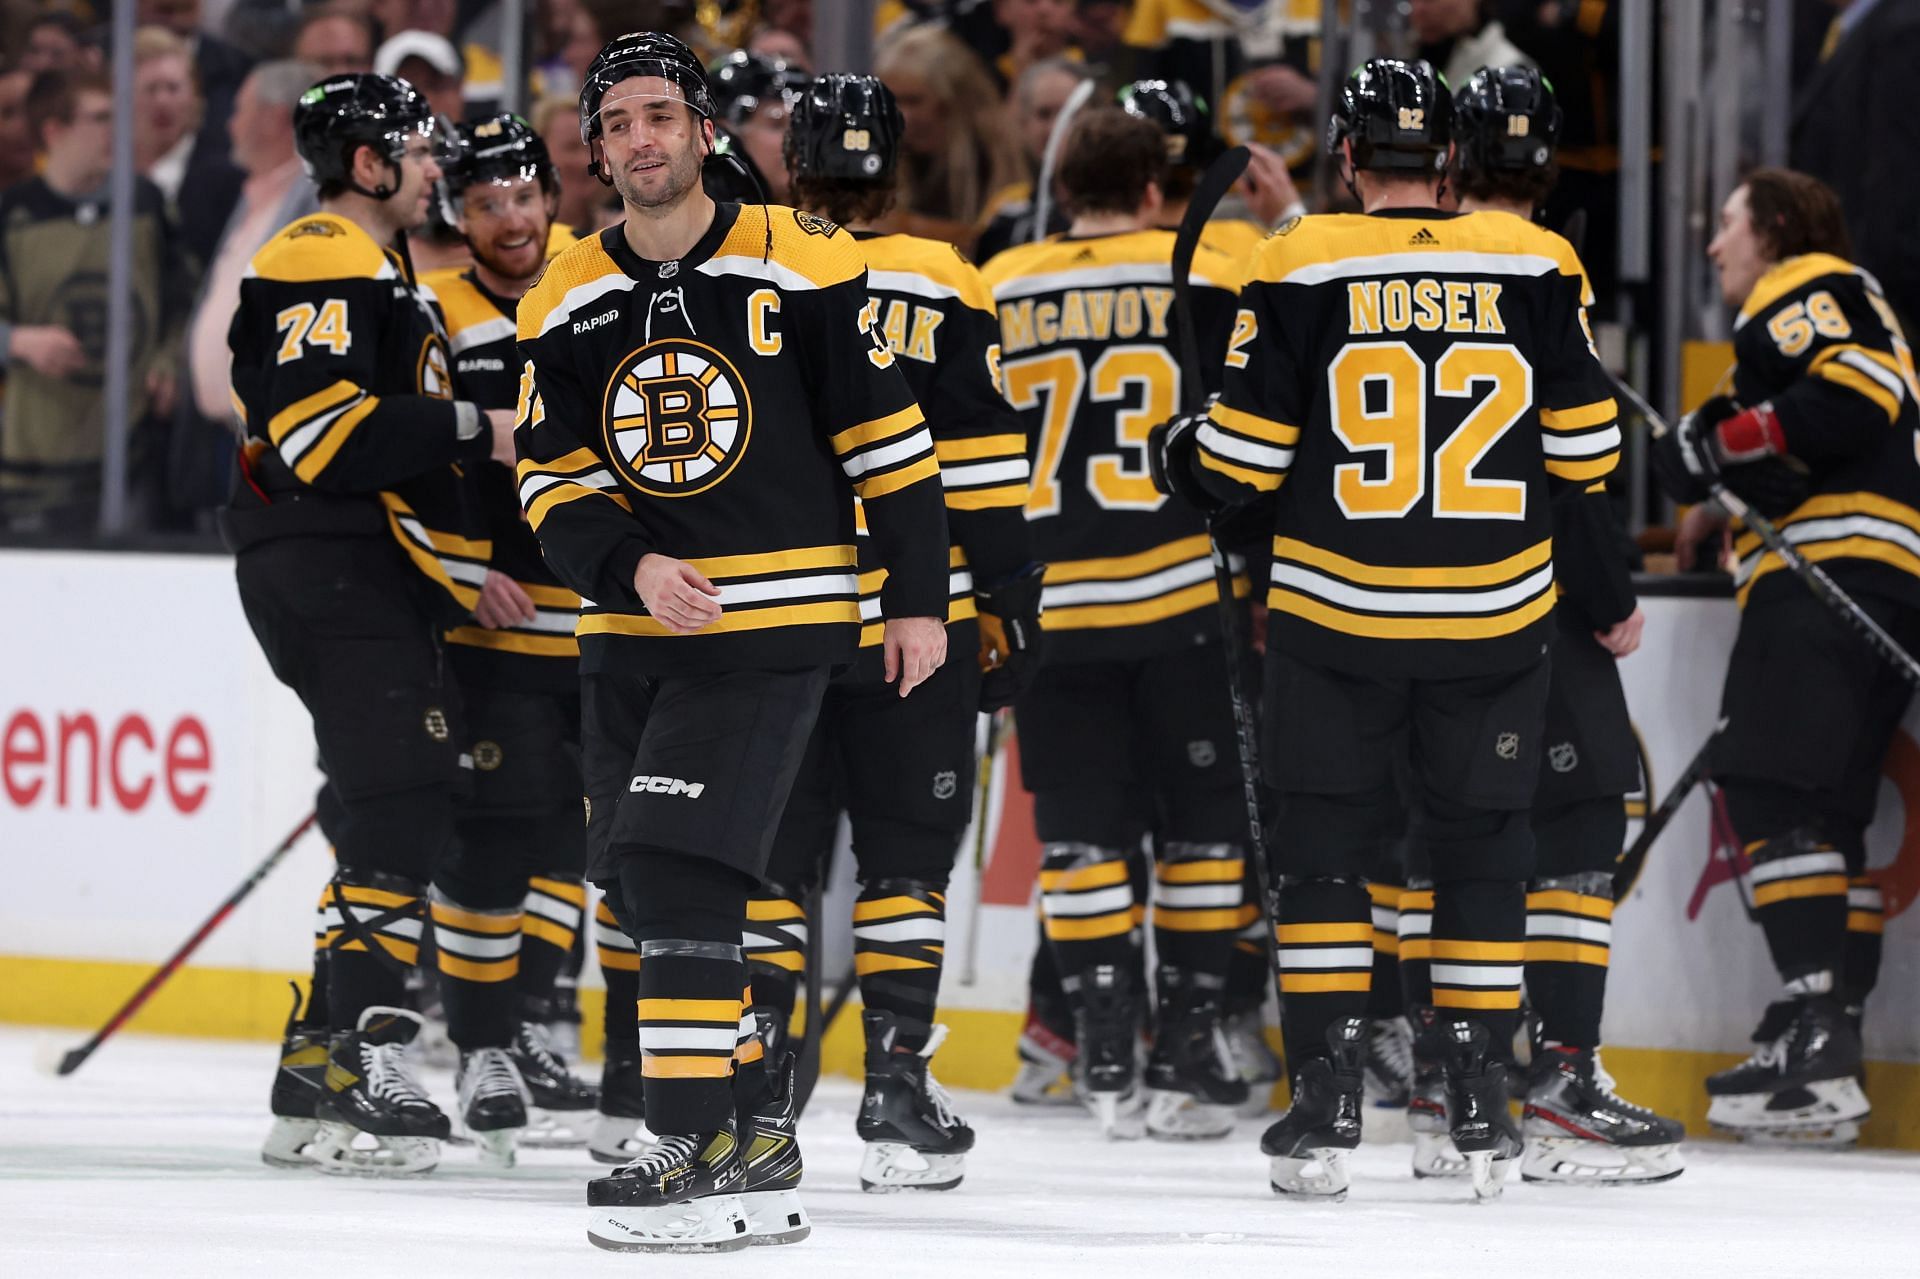 Boston Bruins vs Florida Panthers Series How to Watch, TV Channel List, Live Stream details and More